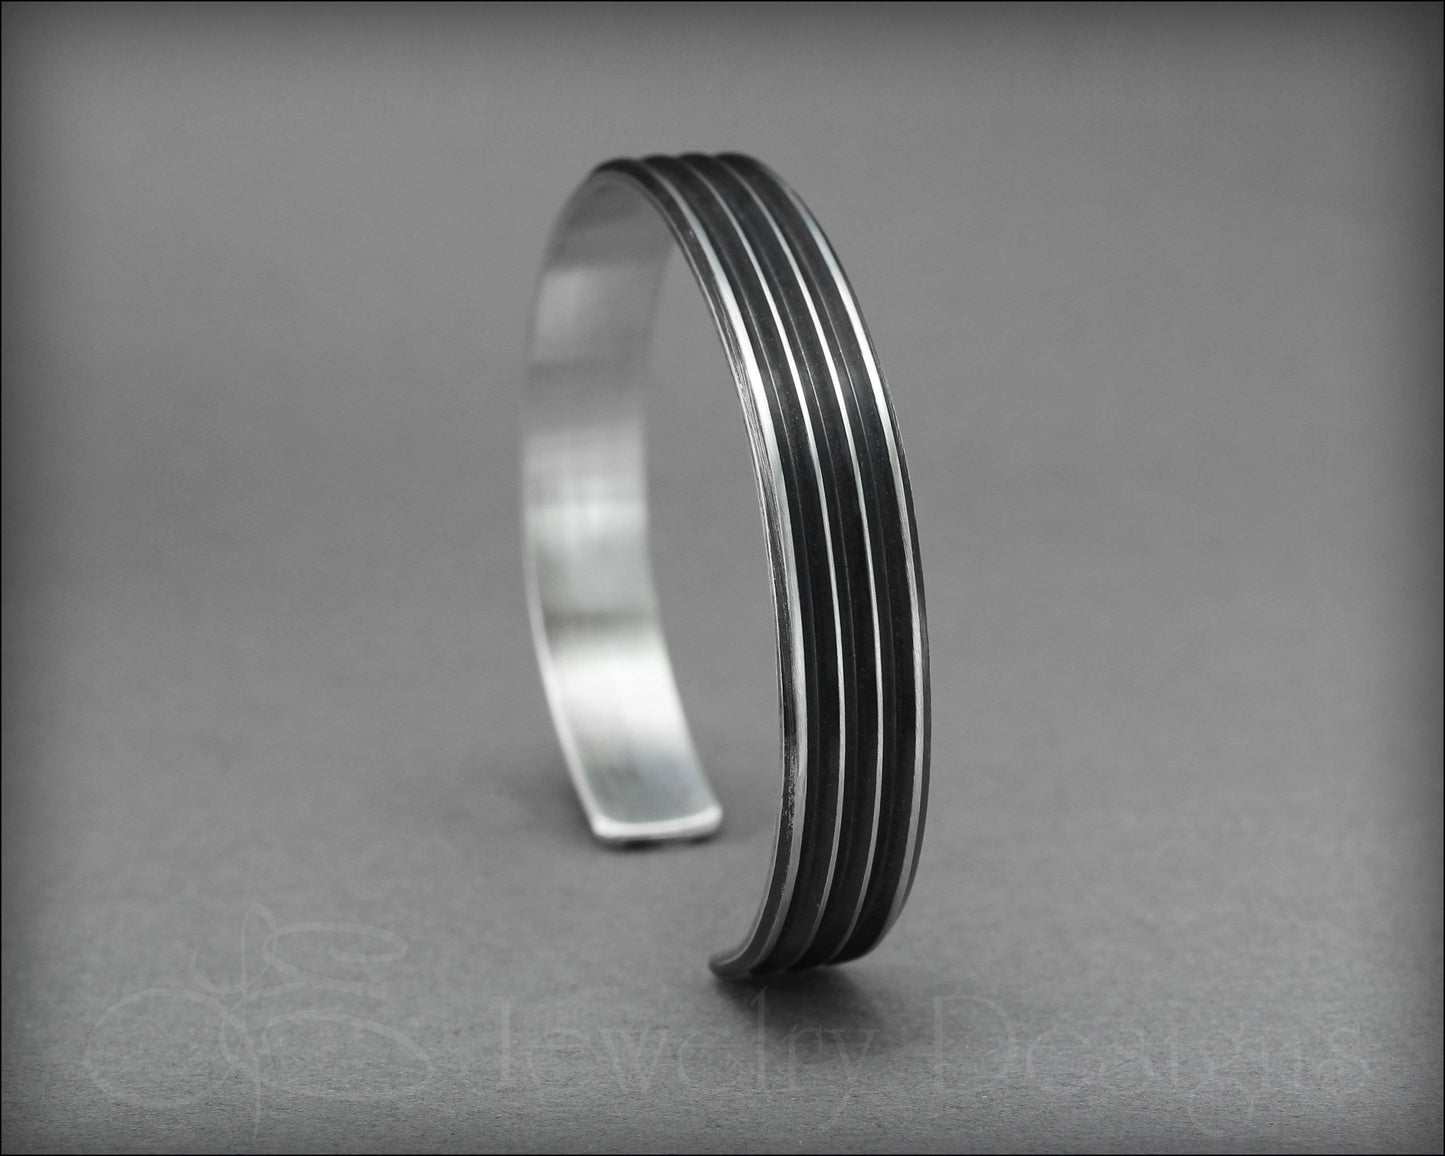 Load image into Gallery viewer, Thick Sterling Cuff - LE Jewelry Designs
